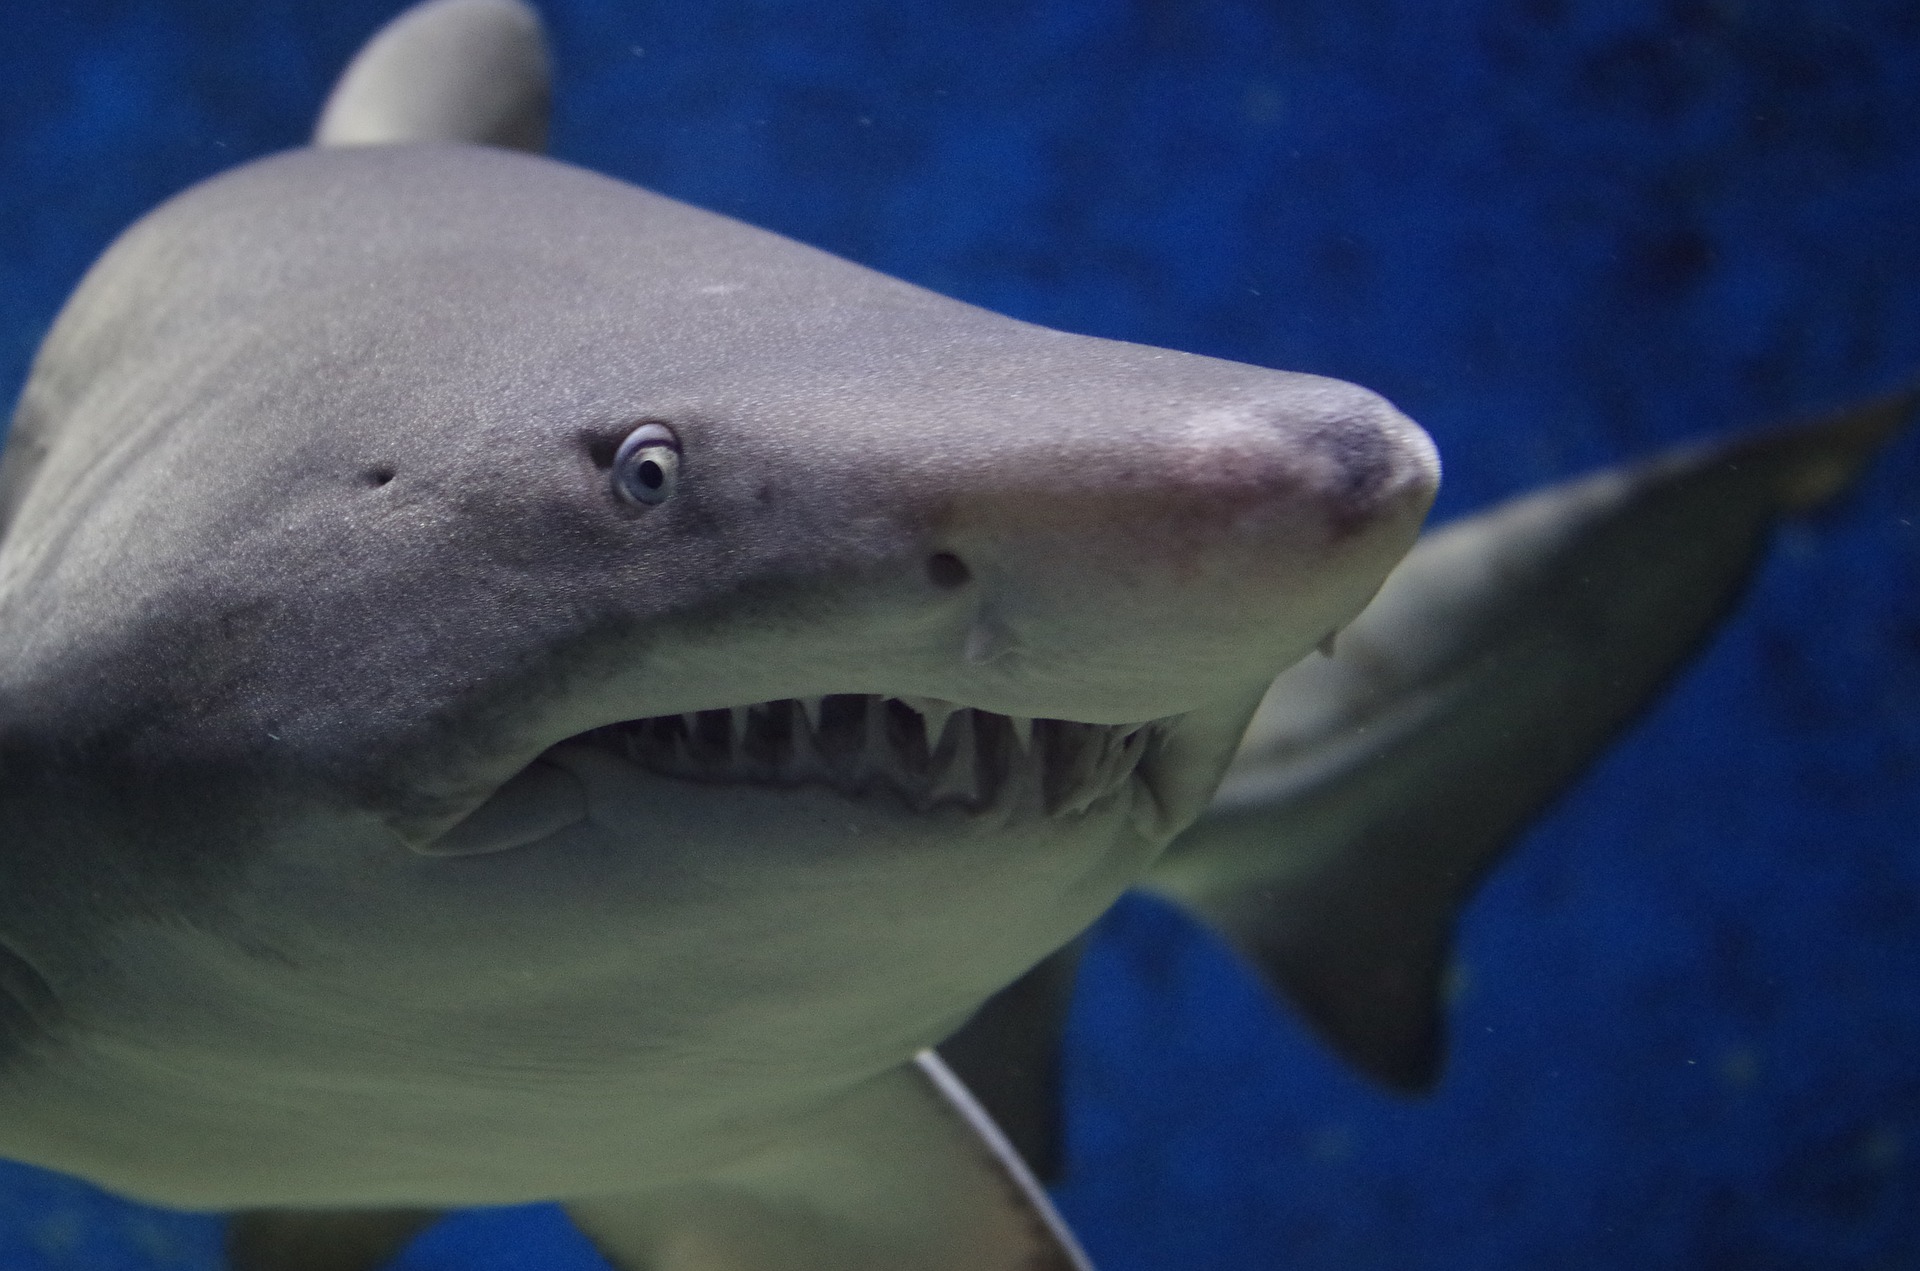 Bad Science on the internet: Shark cartilage as a cancer therapy